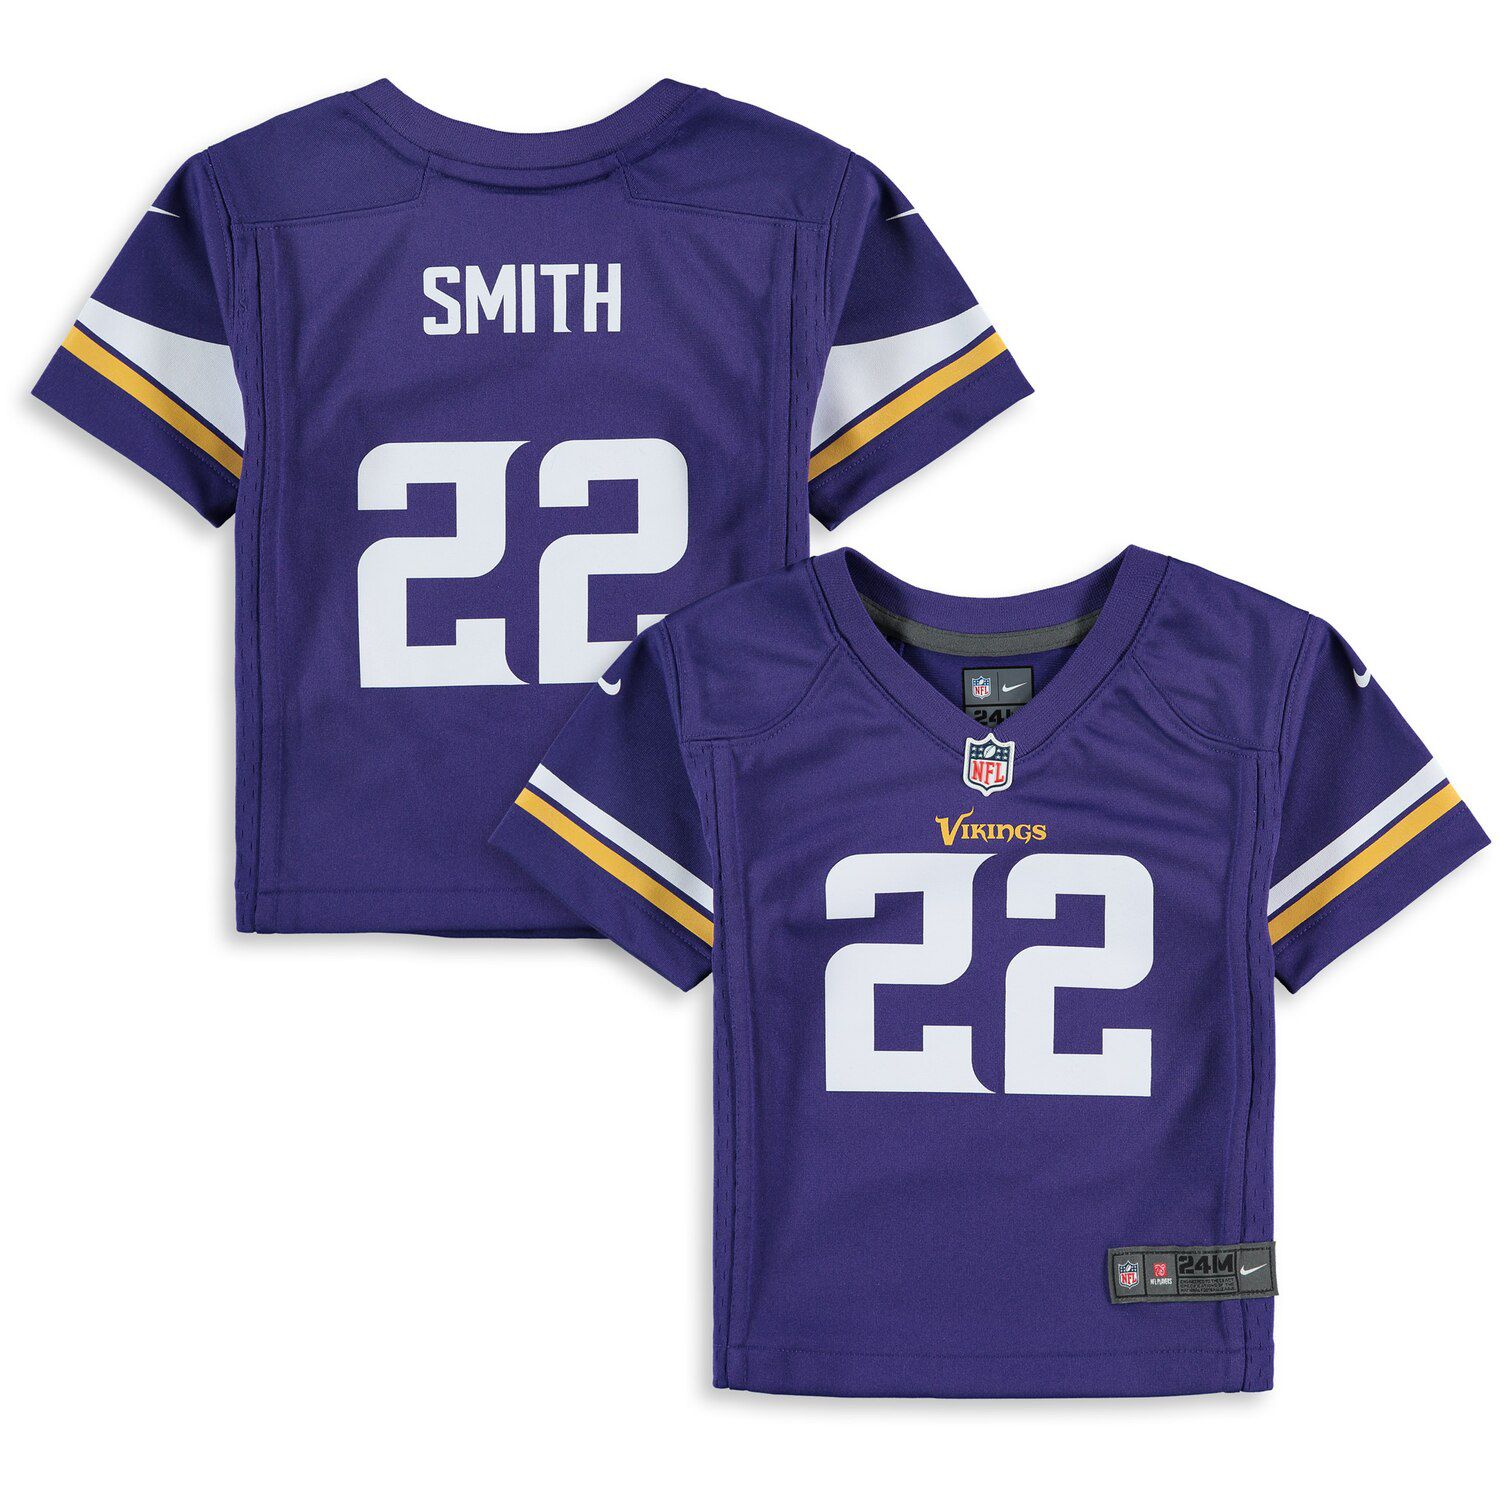 harrison smith game jersey